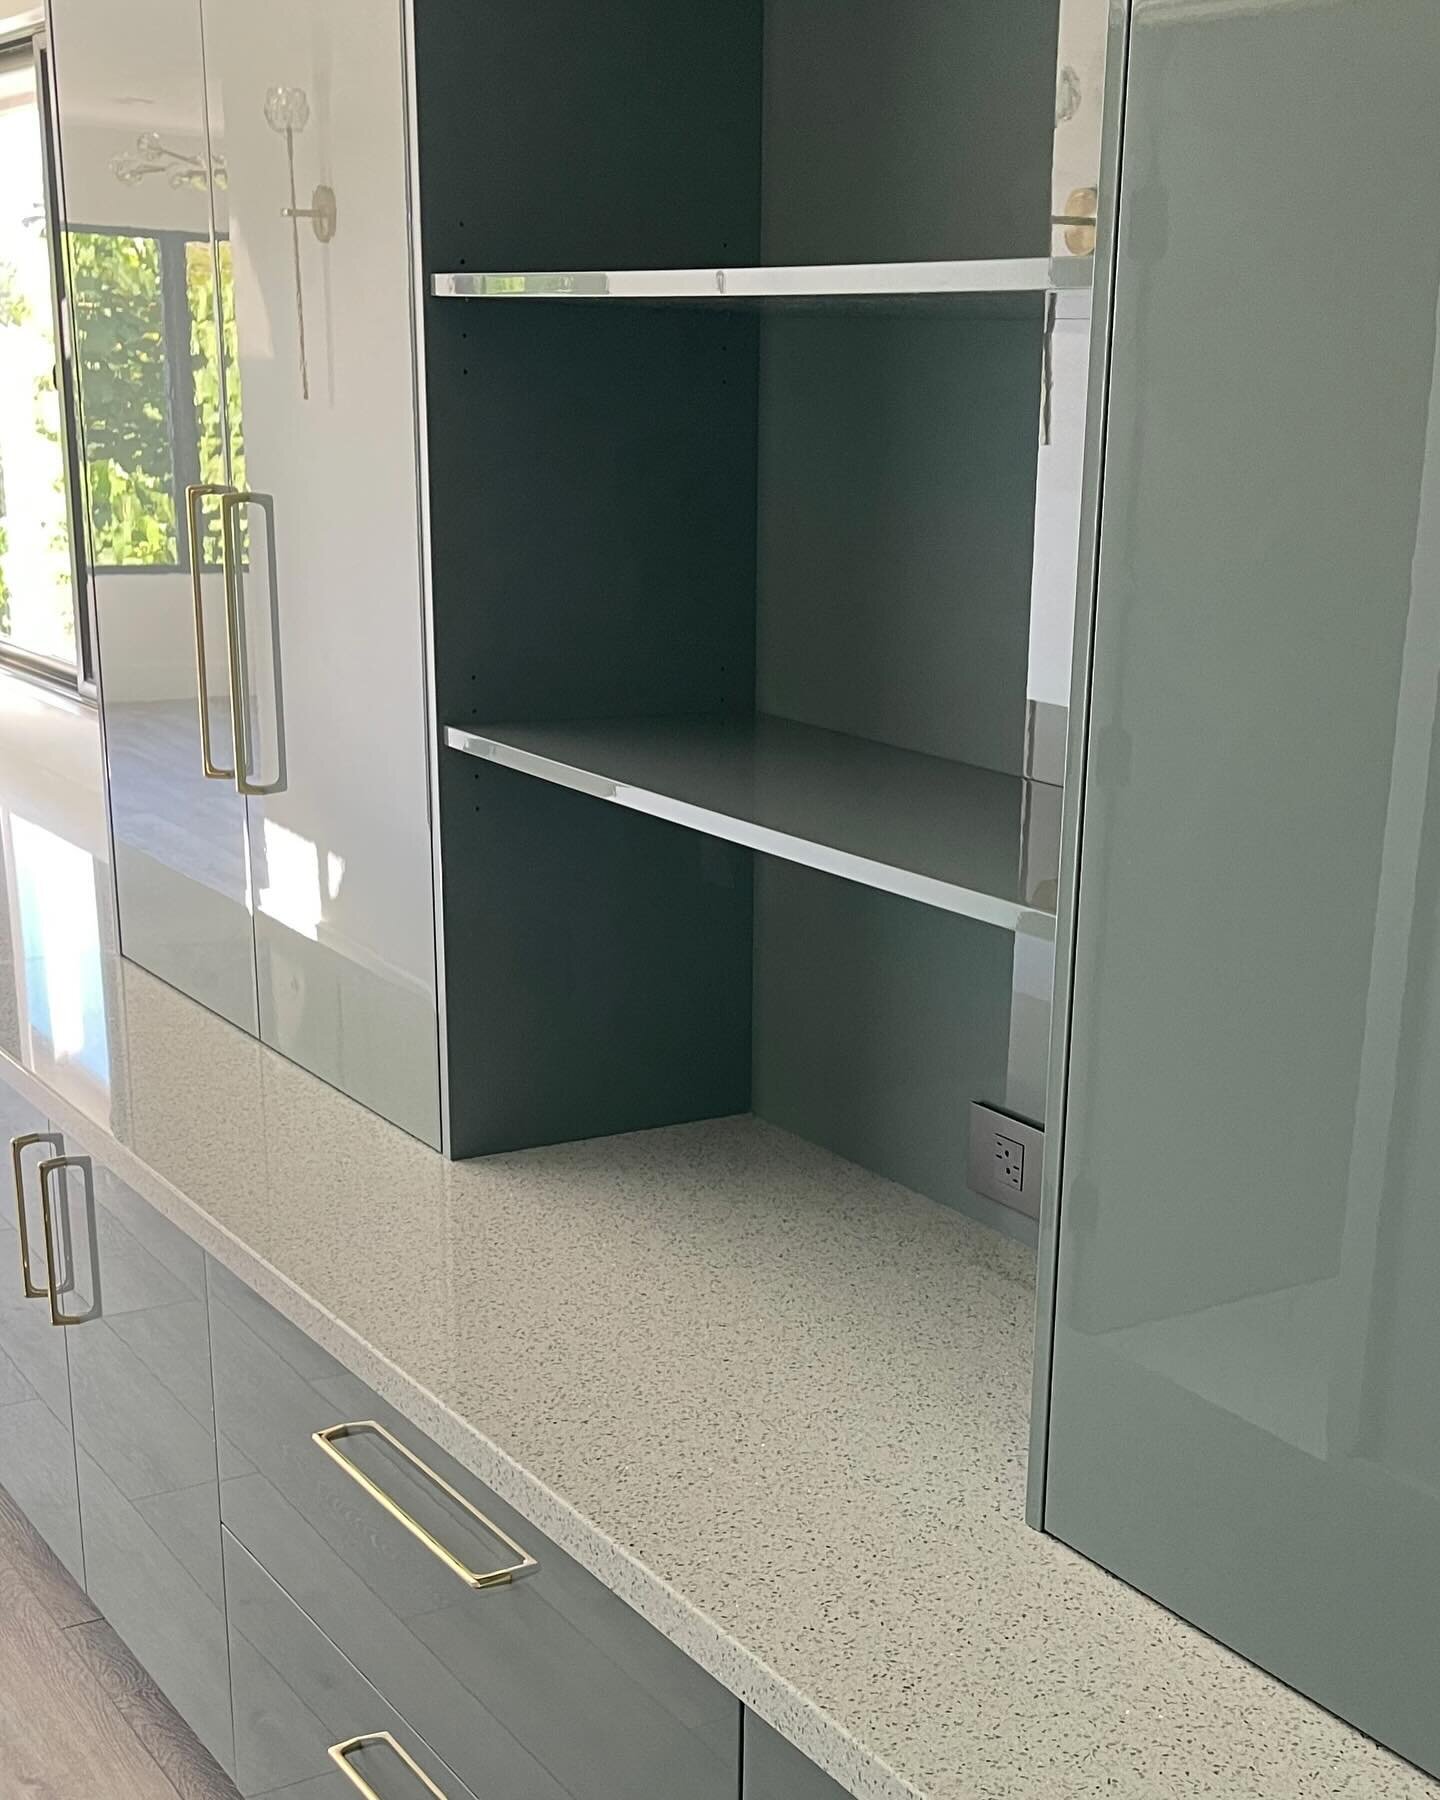 In a hallway leading to the bedroom, a craft station was designed in our high gloss Sage material.  A handy and beautiful space to house all the owner&rsquo;s craft papers, supplies and miscellaneous art.

Craft Cabinet:  Custom Sage high gloss, flat